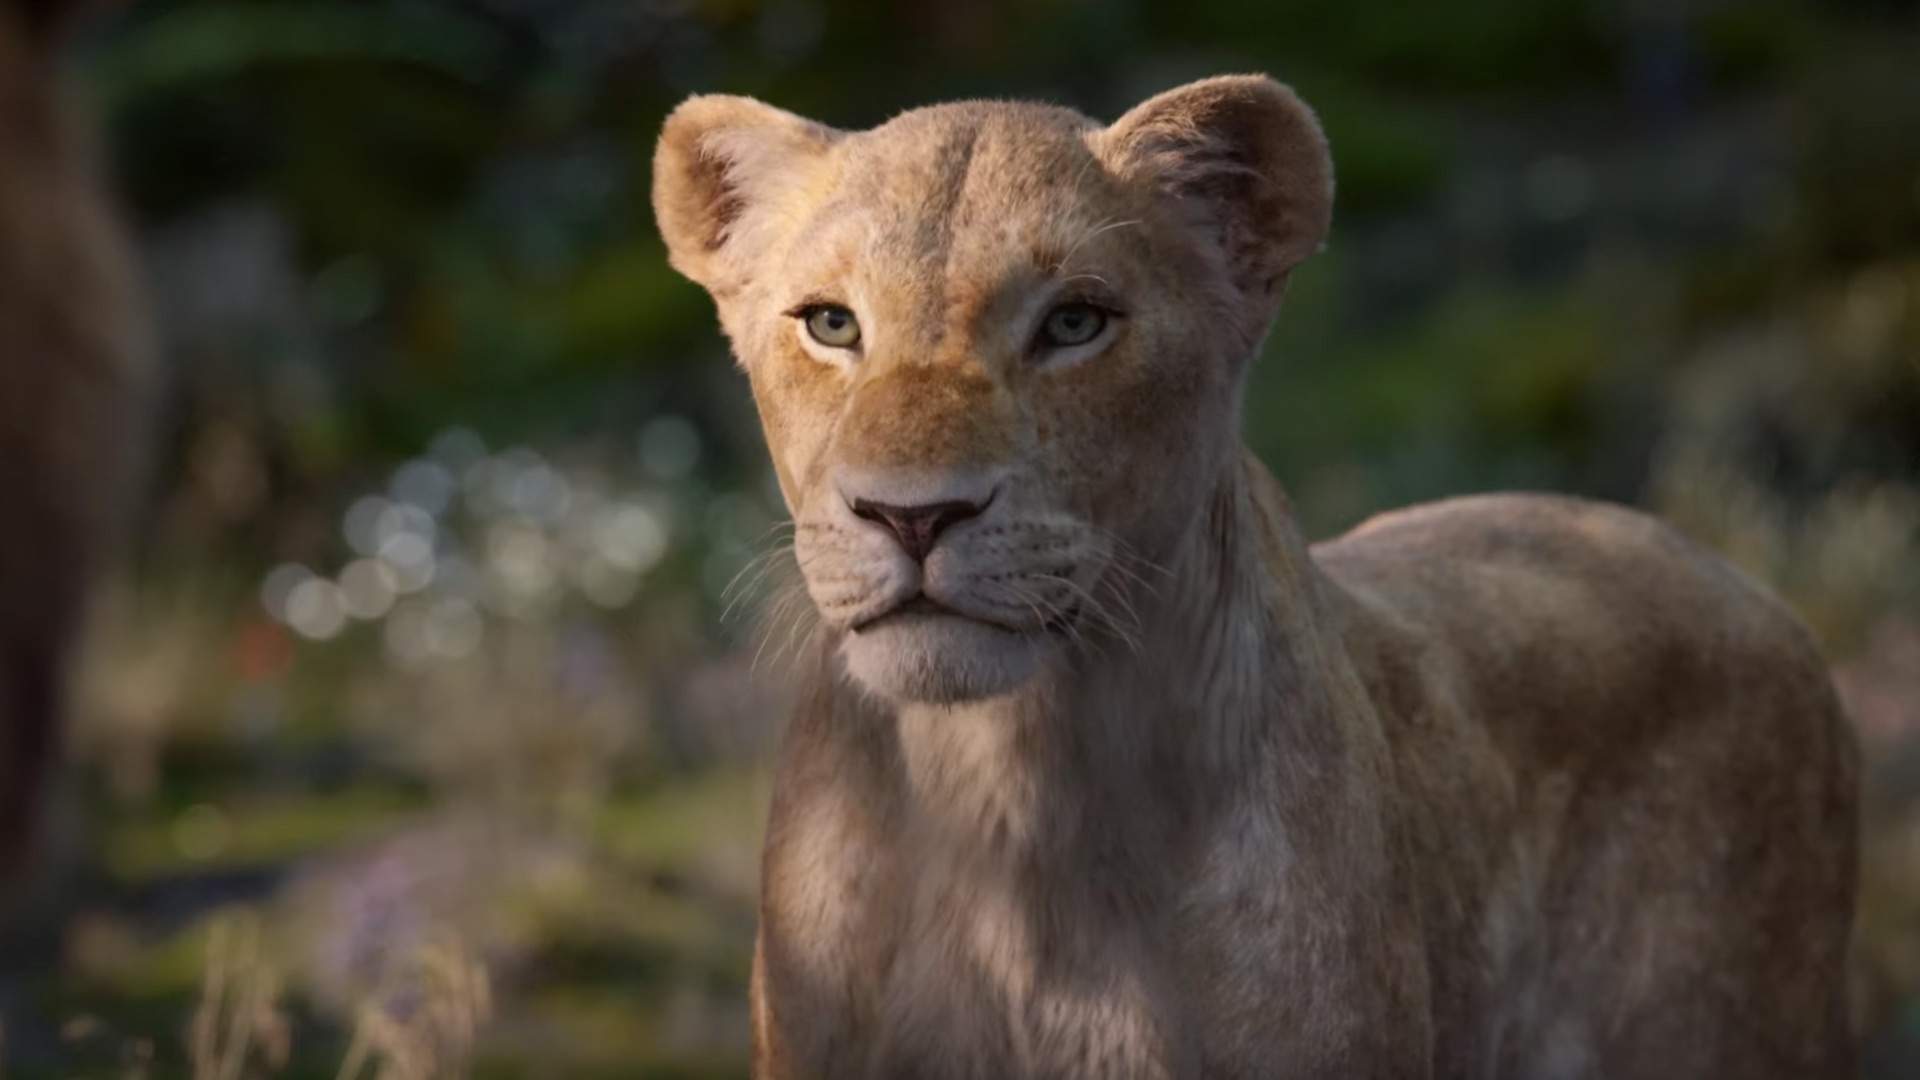 You Can Finally Hear Beyoncé as Nala in the New Teaser for the Live-Action 'Lion King'